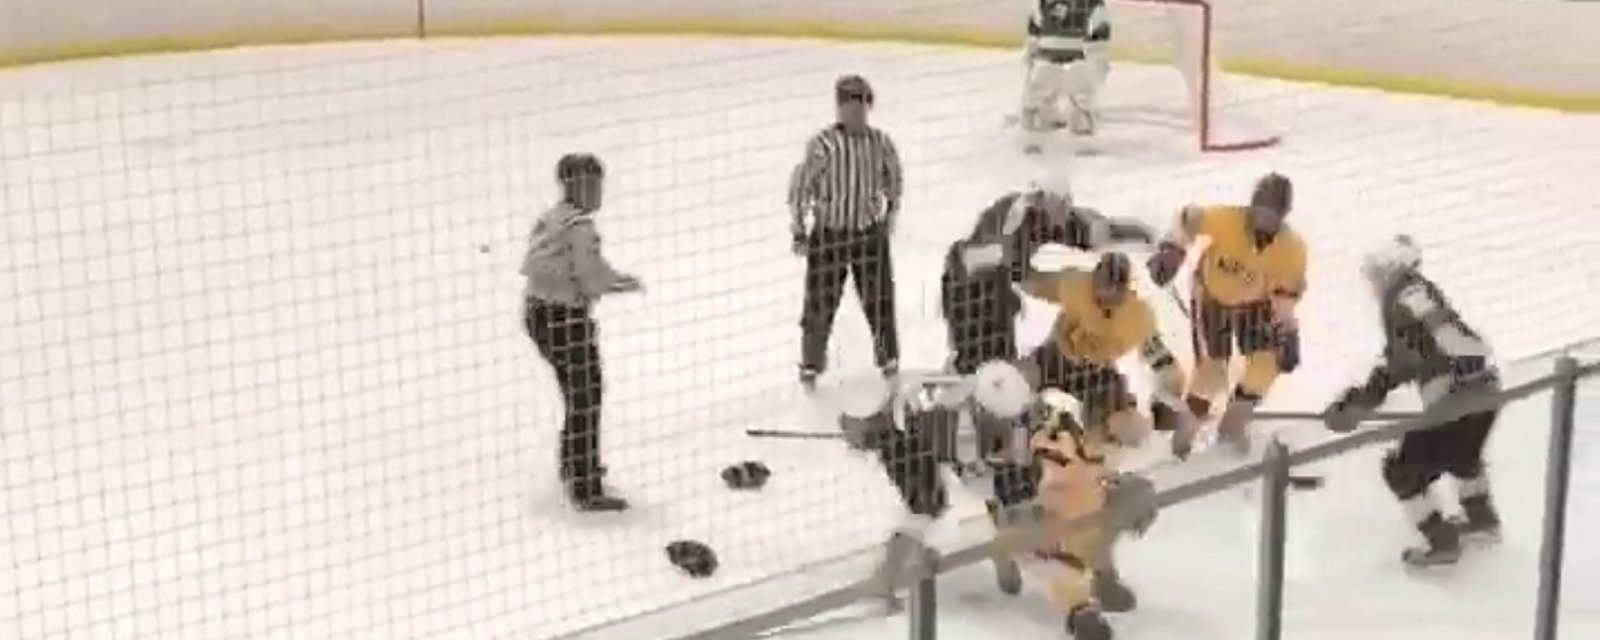 Violent brawl on the ice results in more fights in the crowd.